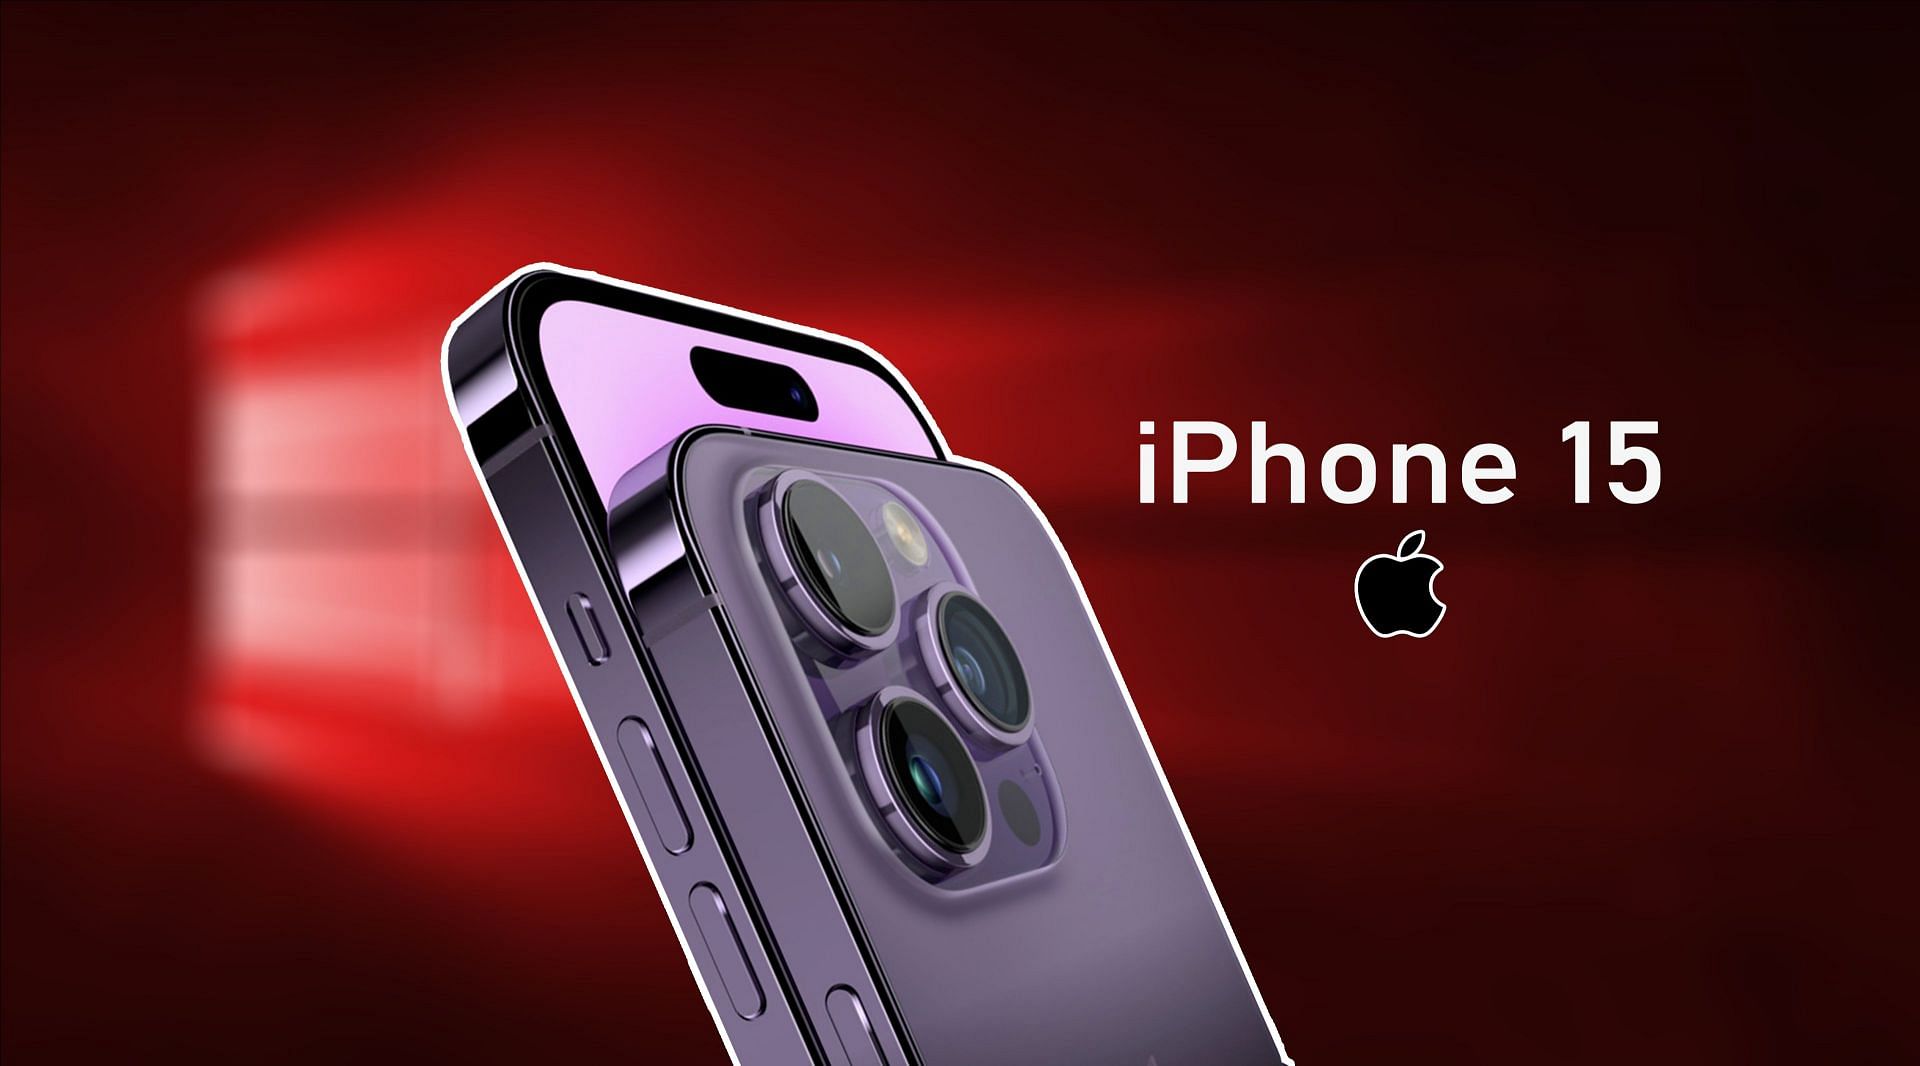 The upcoming iPhone 15 models appear to have a refreshed design, with Apple introducing exciting new features. 